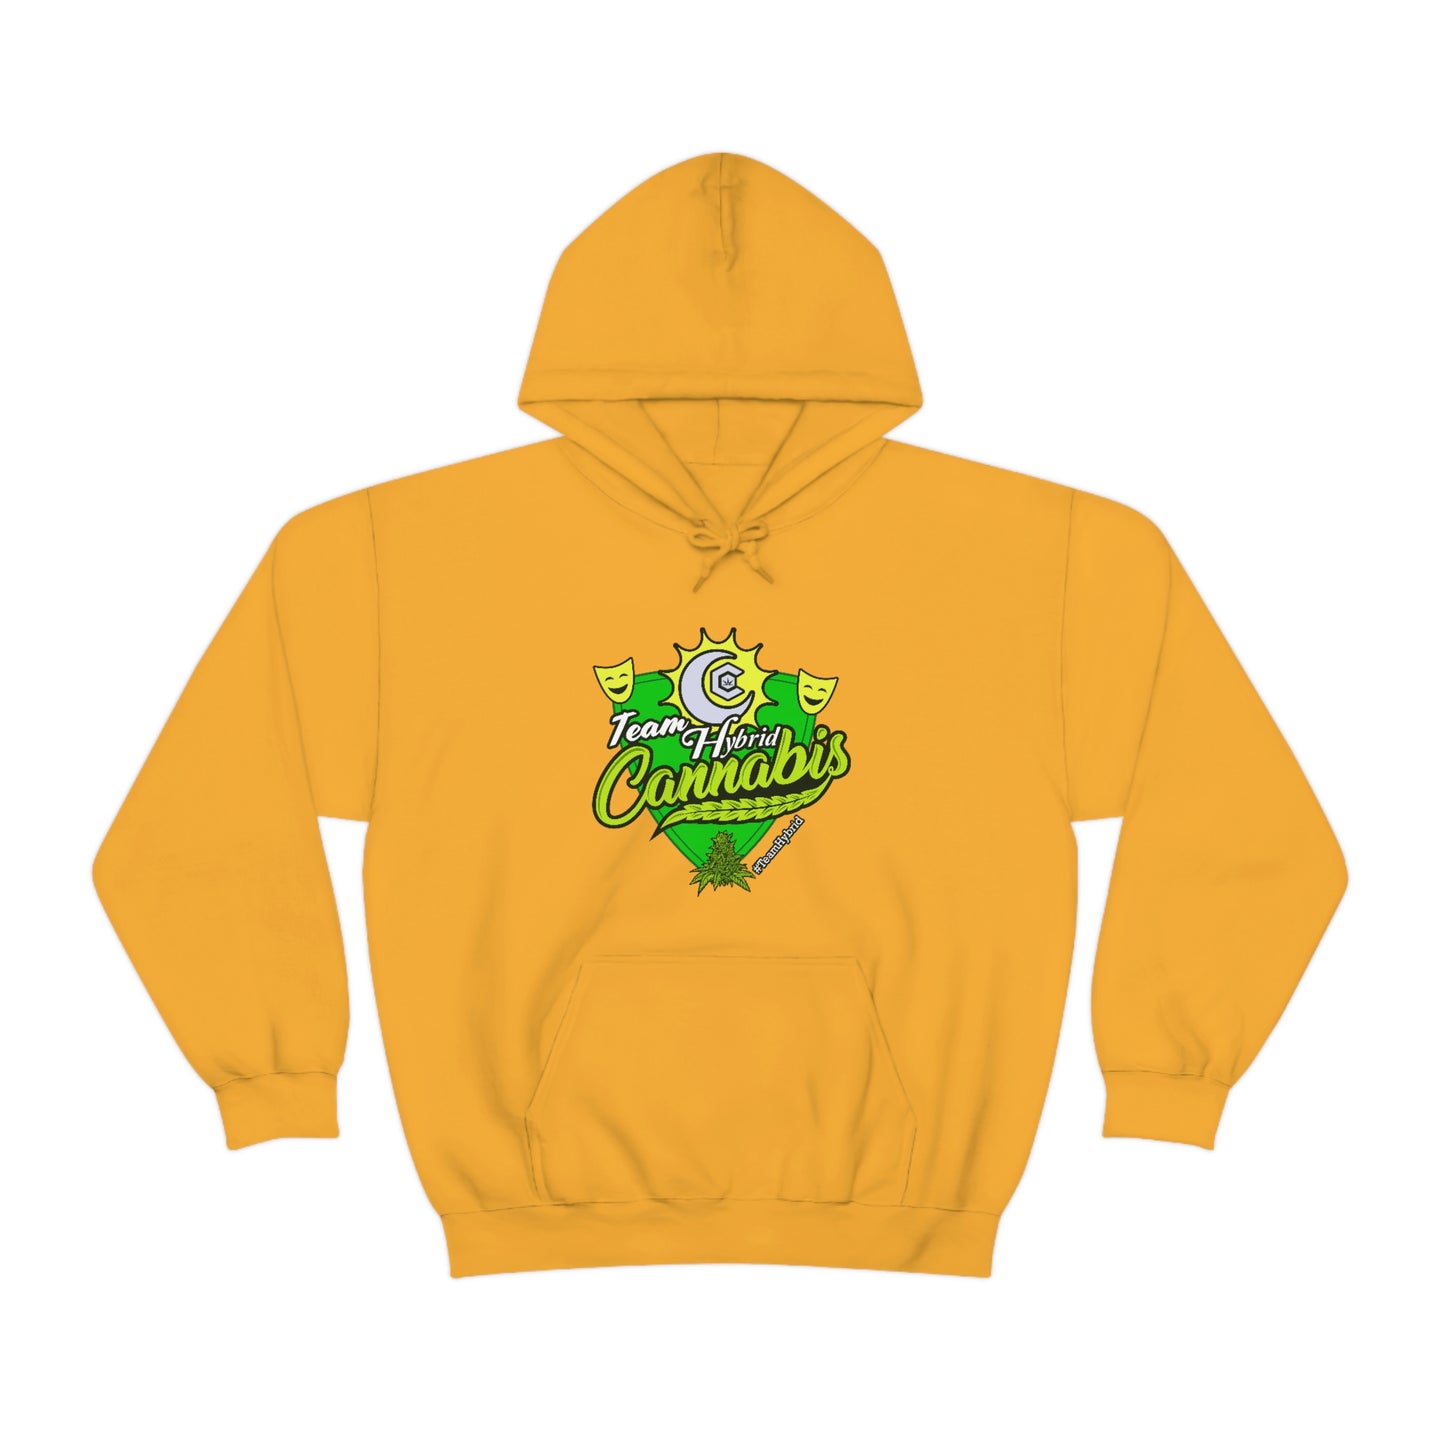 a yellow Team Hybrid Cannabis Pullover Hoodie with a green logo on it.